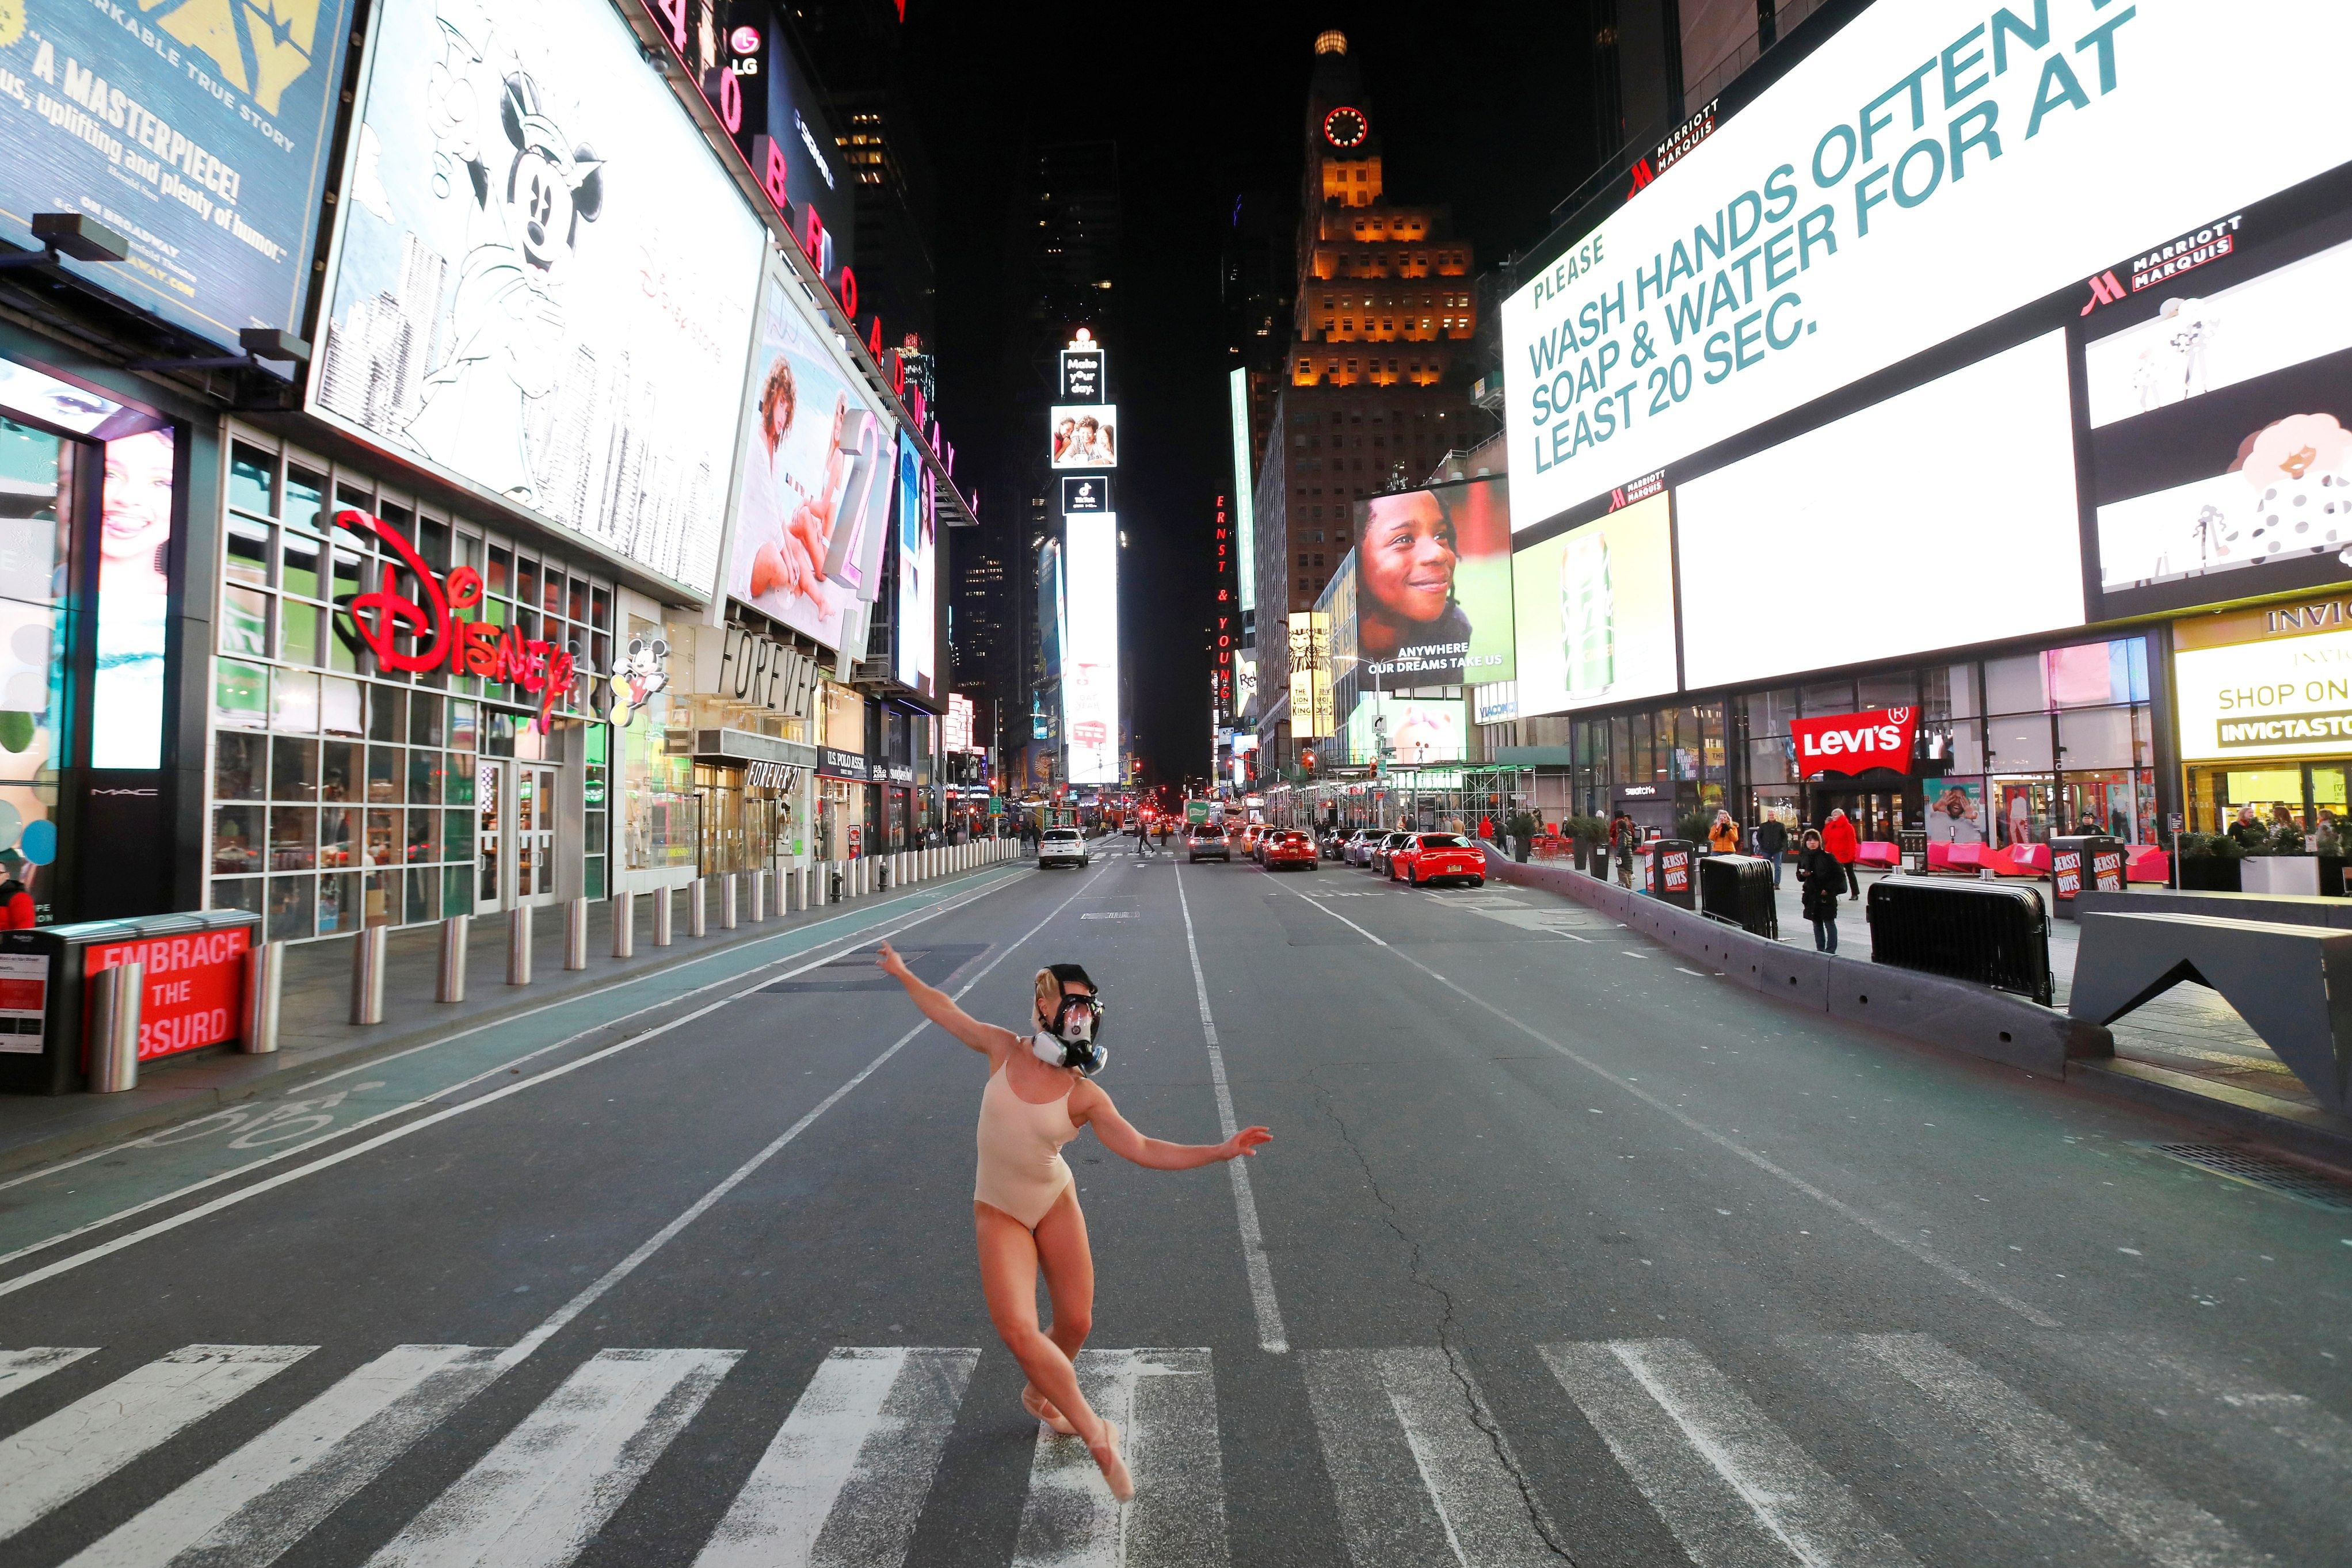 Ballet dancer and performer Ashlee Montague of New York wears a gas mask while she dances in Times Square. (Credit: Reuters)